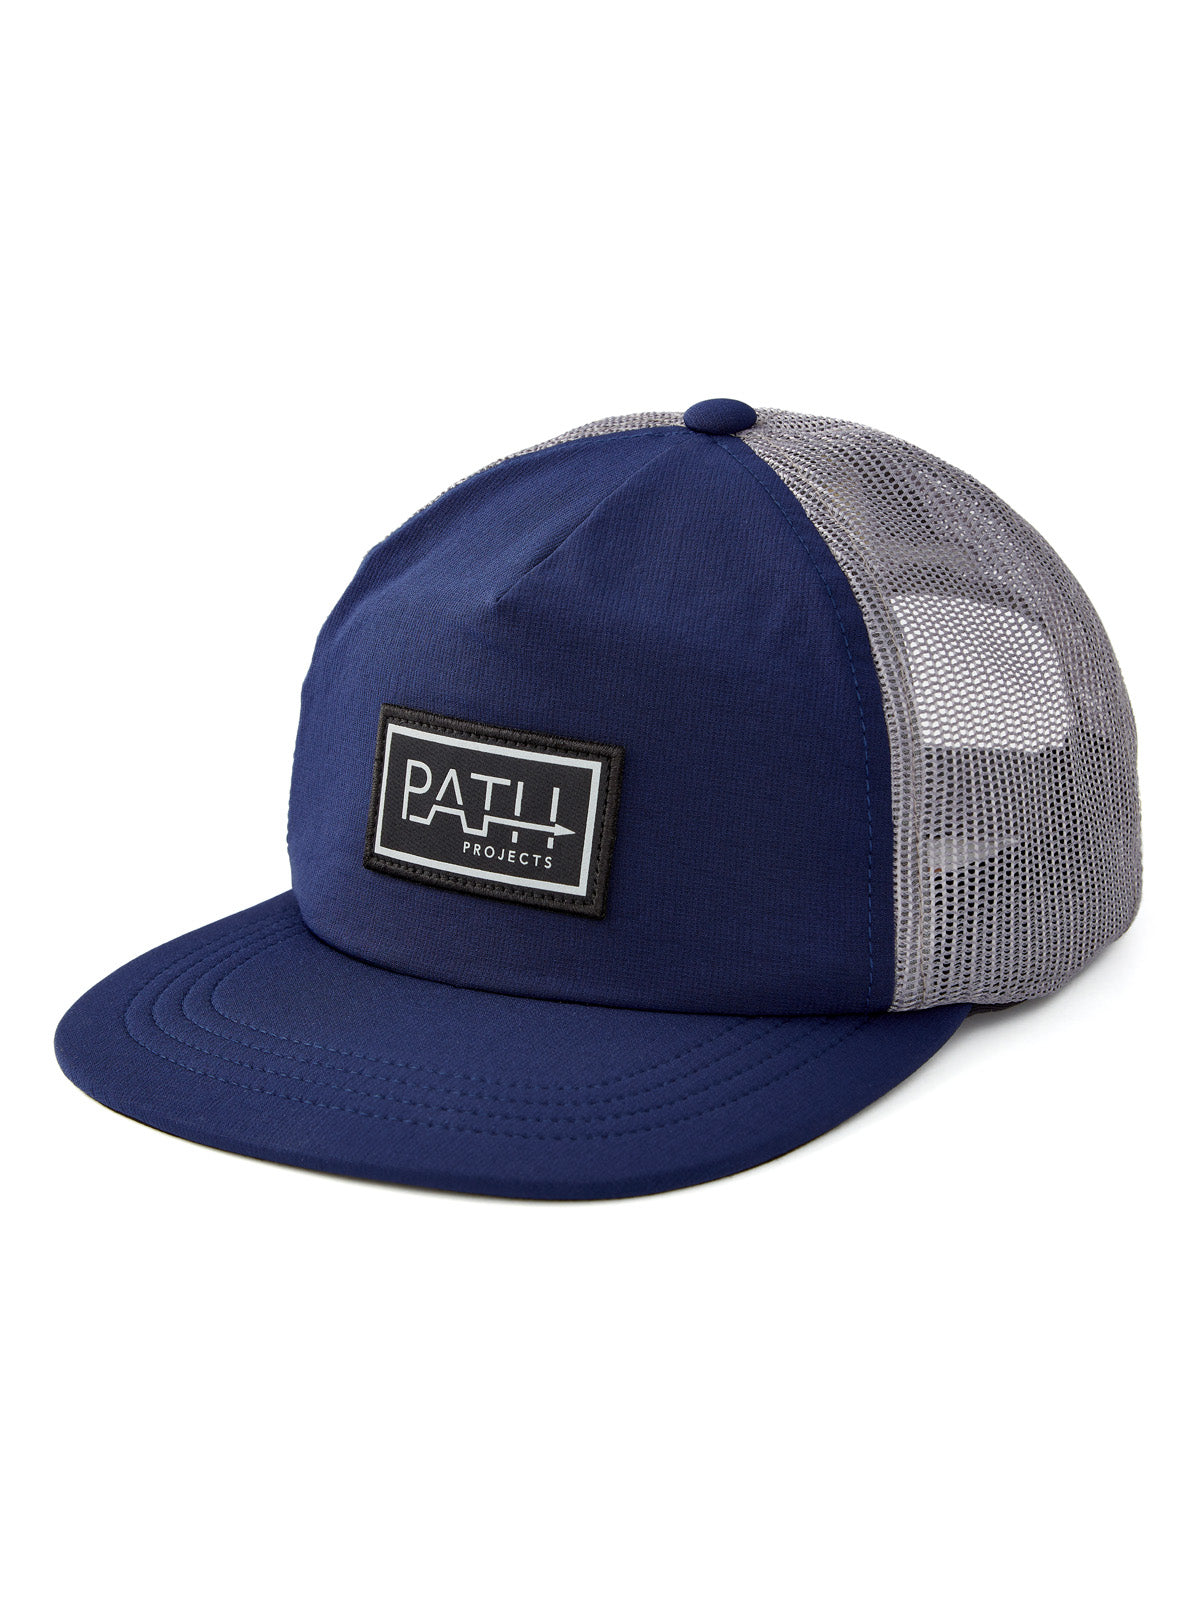 Big Bend Trucker Hat for Running | Path Projects Navy / Grey